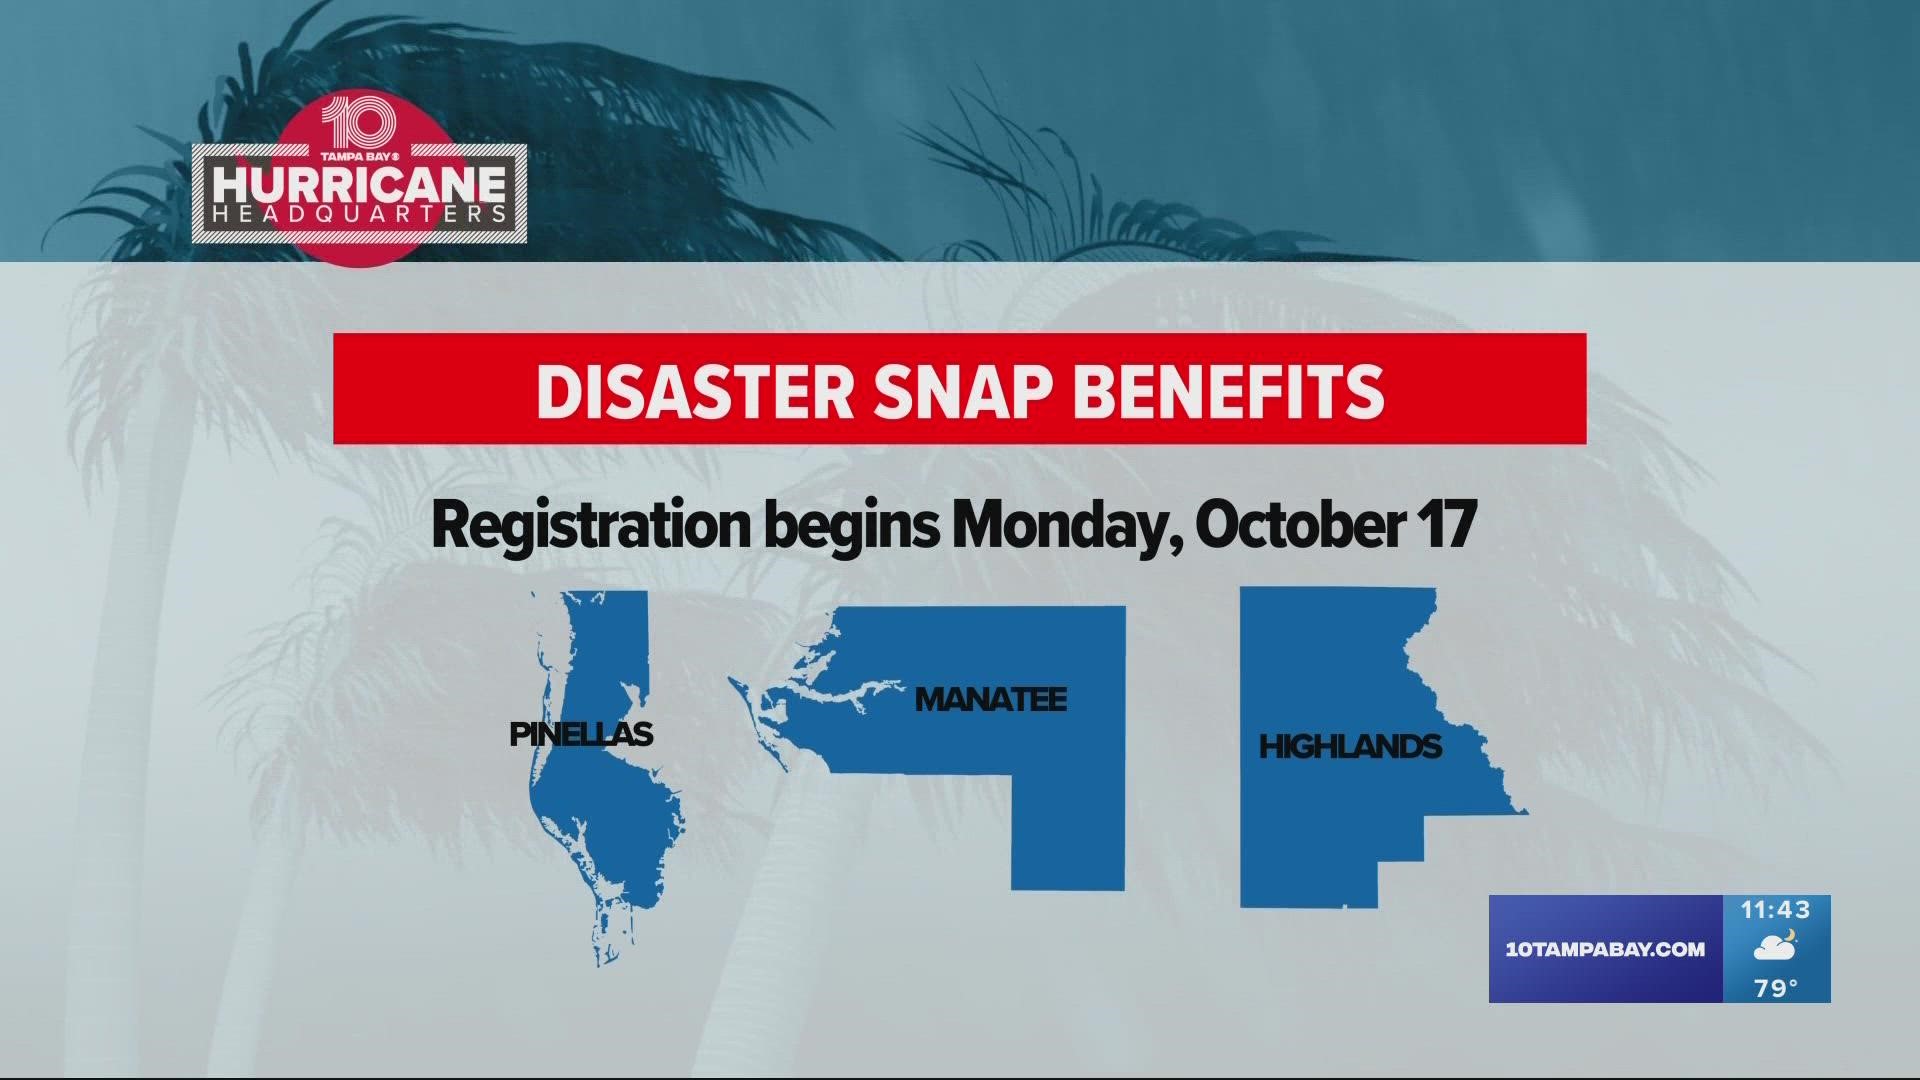 People in Flagler, Highlands, Manatee, Orange, Pinellas and St. Johns counties are eligible to receive disaster assistance.